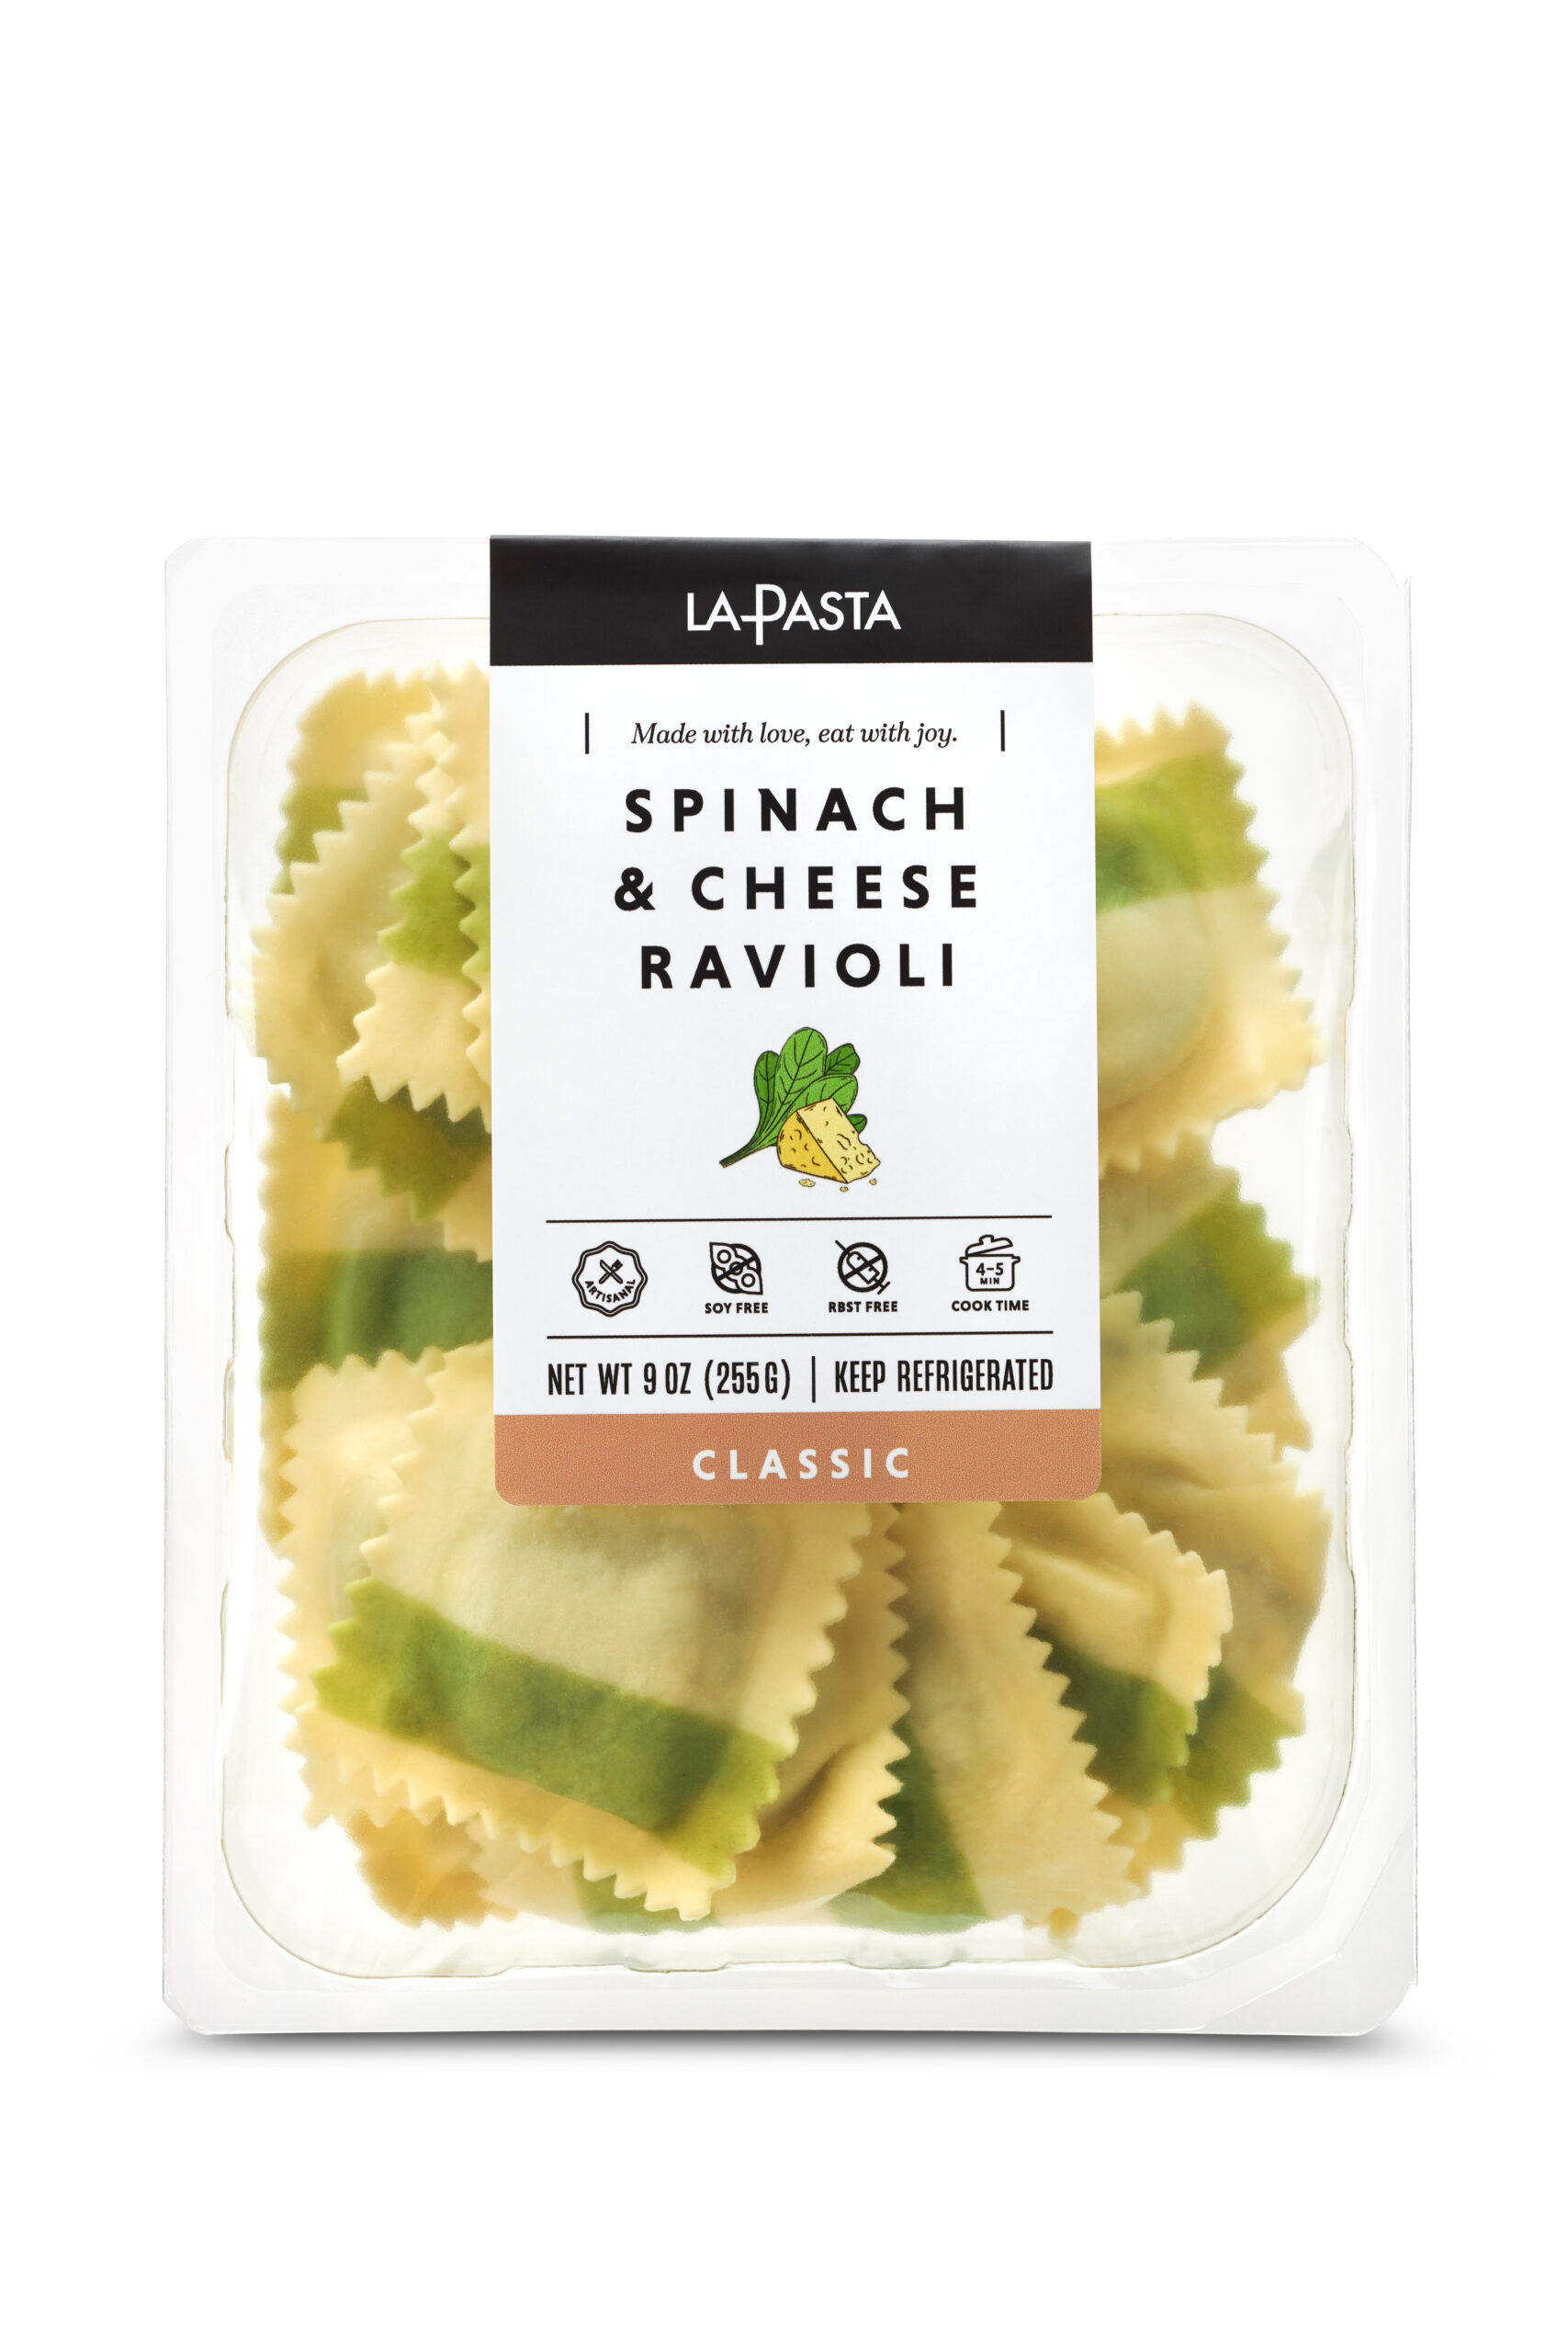 A package of spinach and cheese ravioli.